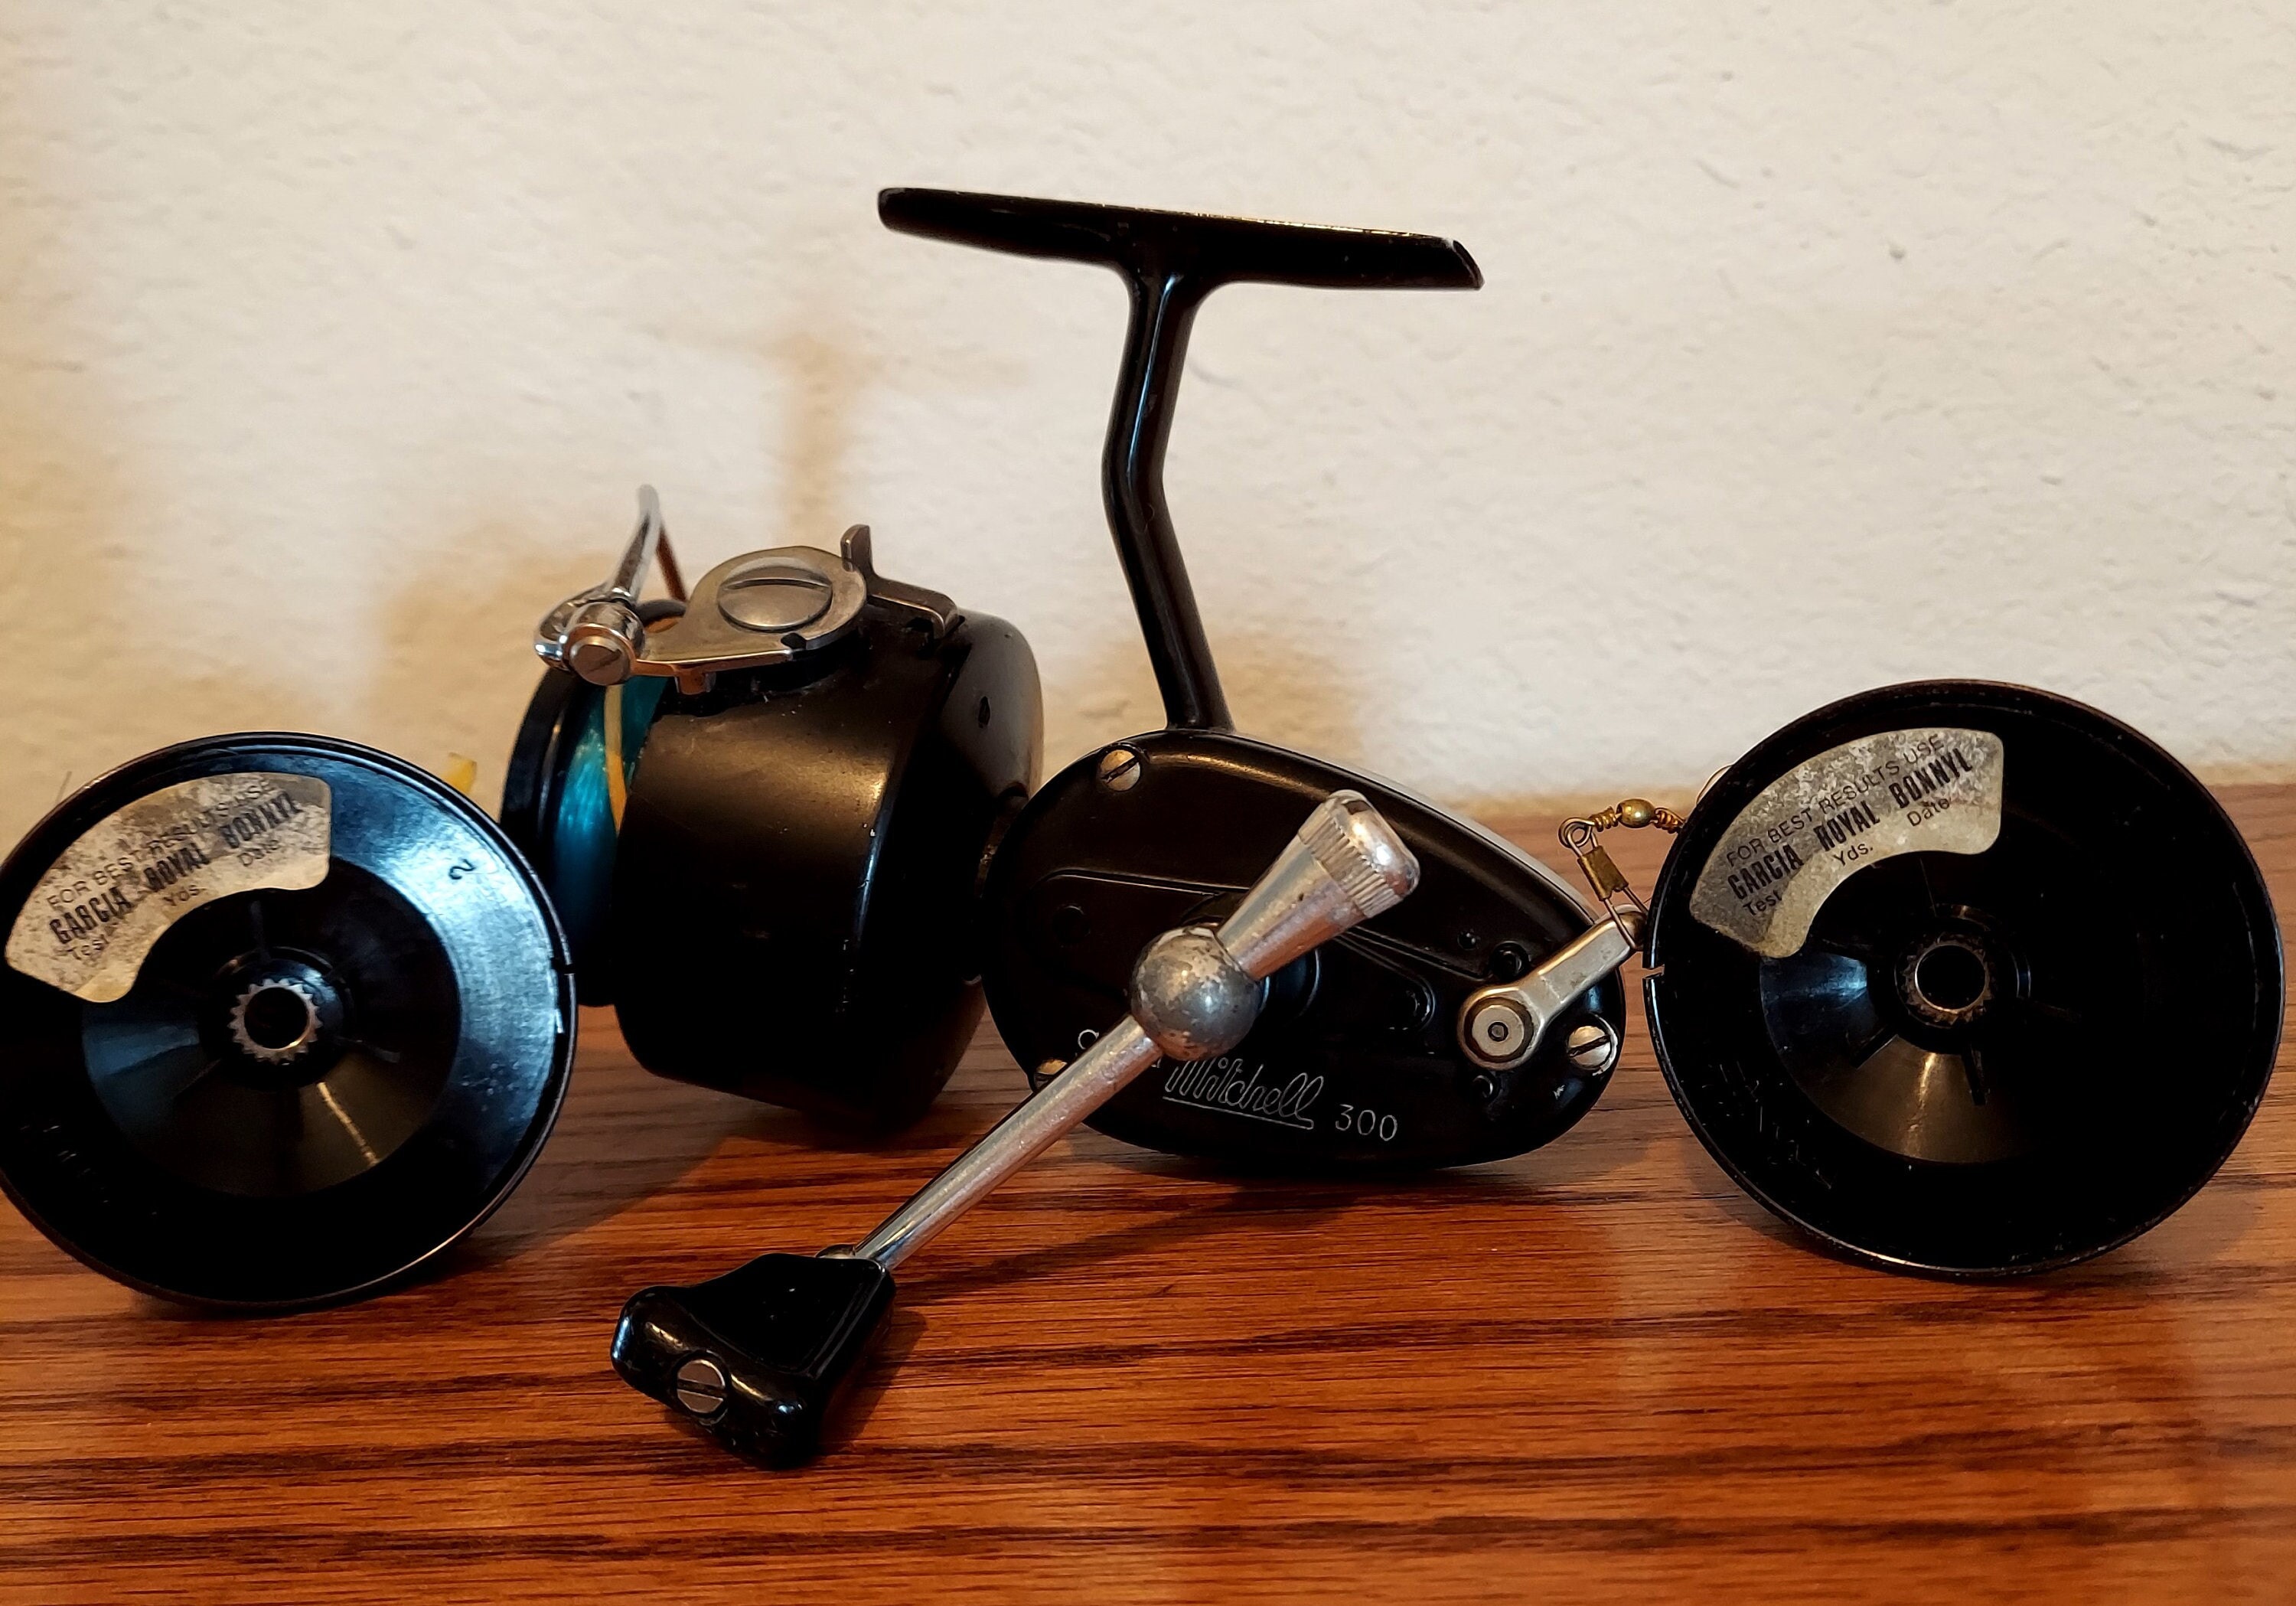 Mitchell Garcia 300 Series Fishing Reel With Two Spools and Original Box 